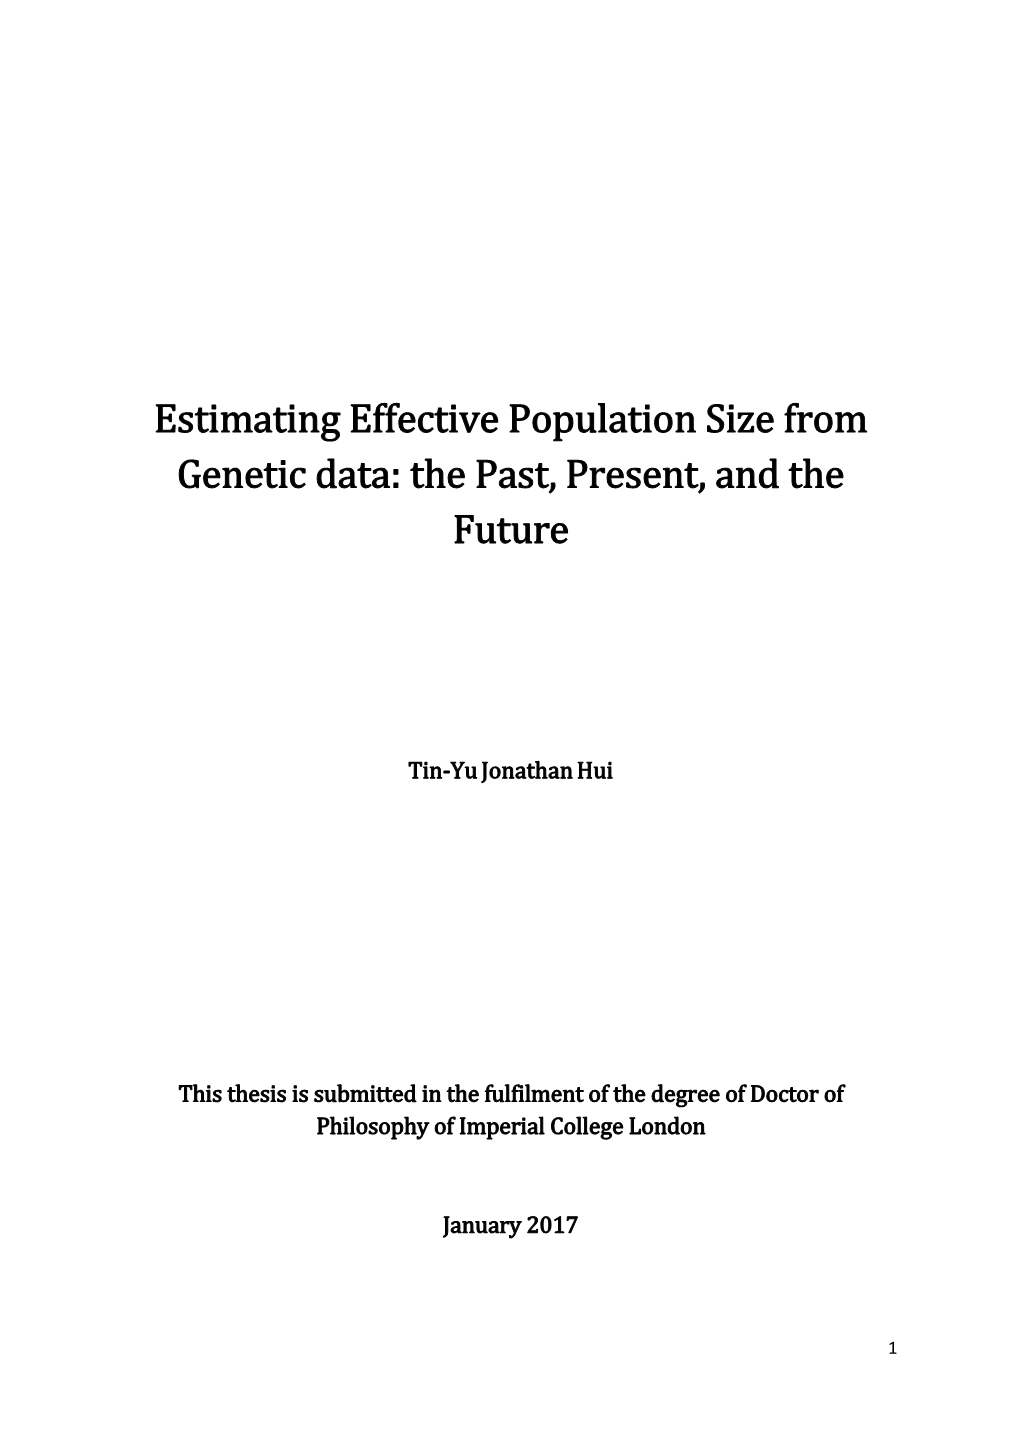 Estimating Effective Population Size from Genetic Data: the Past, Present, and the Future